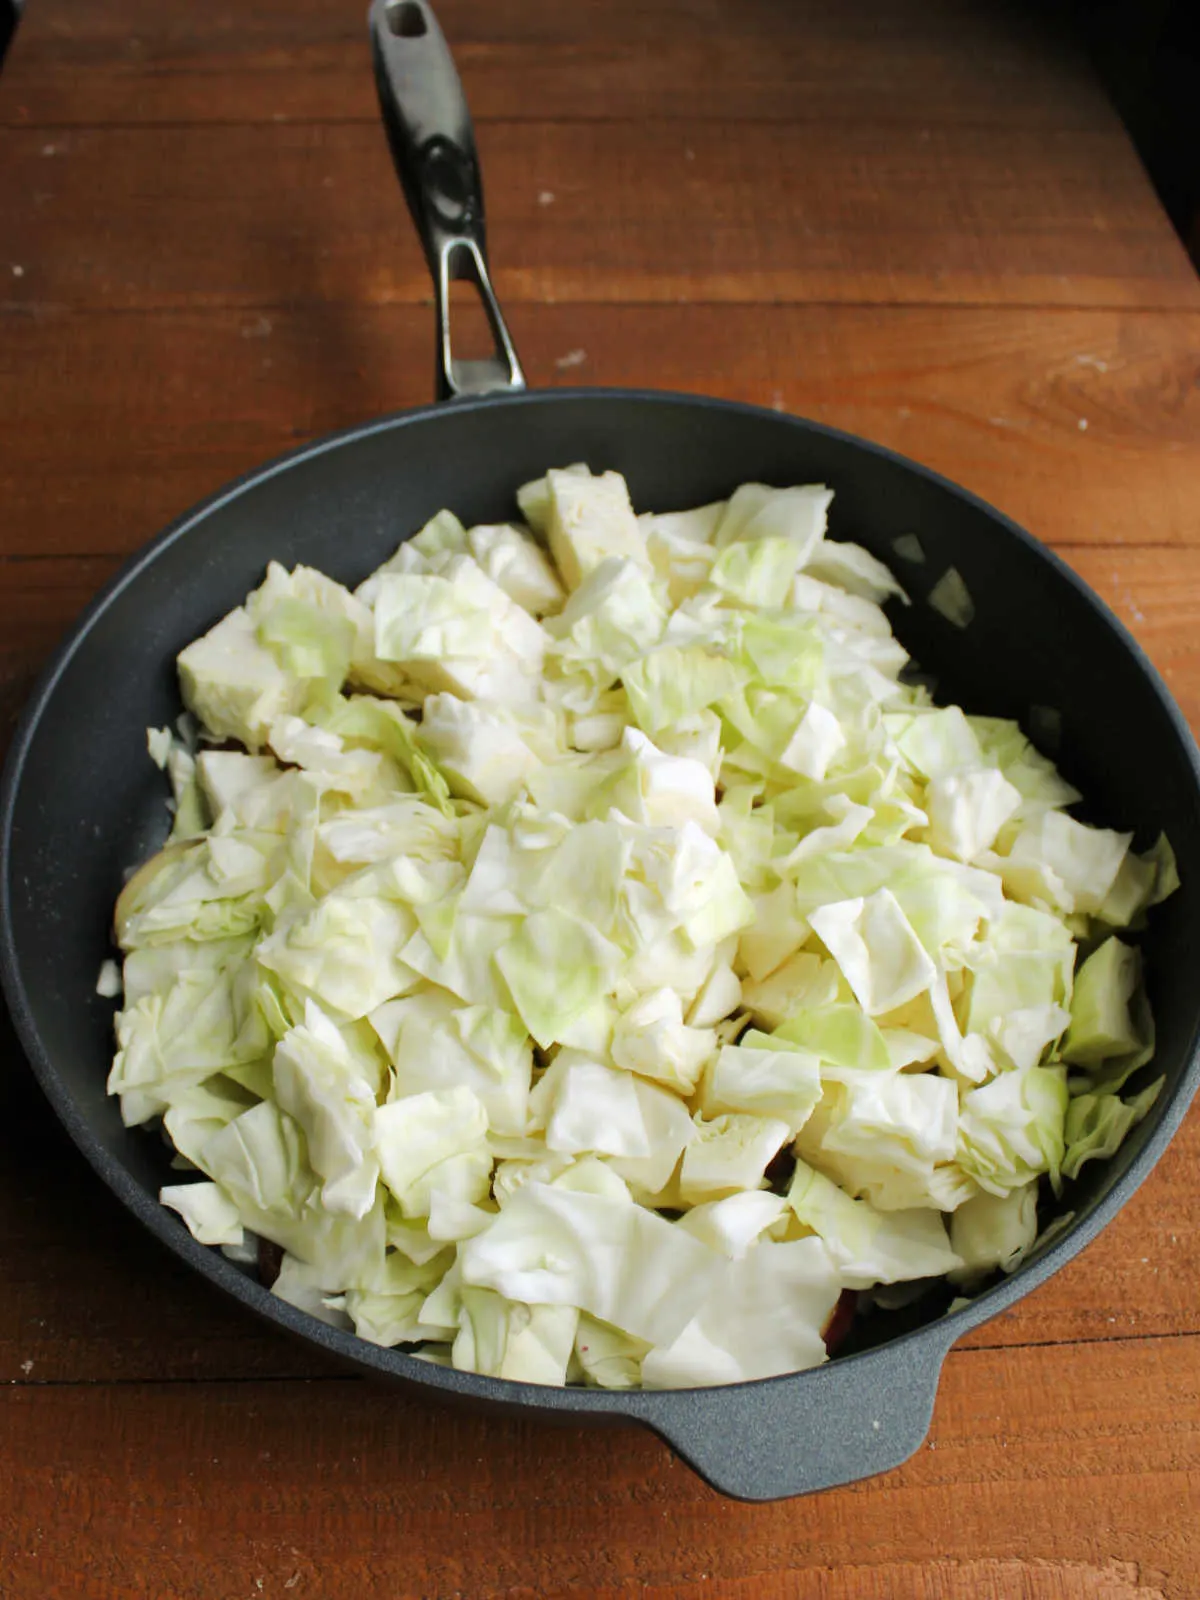 Adding chopped cabbage to skillet with partially cooked potatoes and onions.